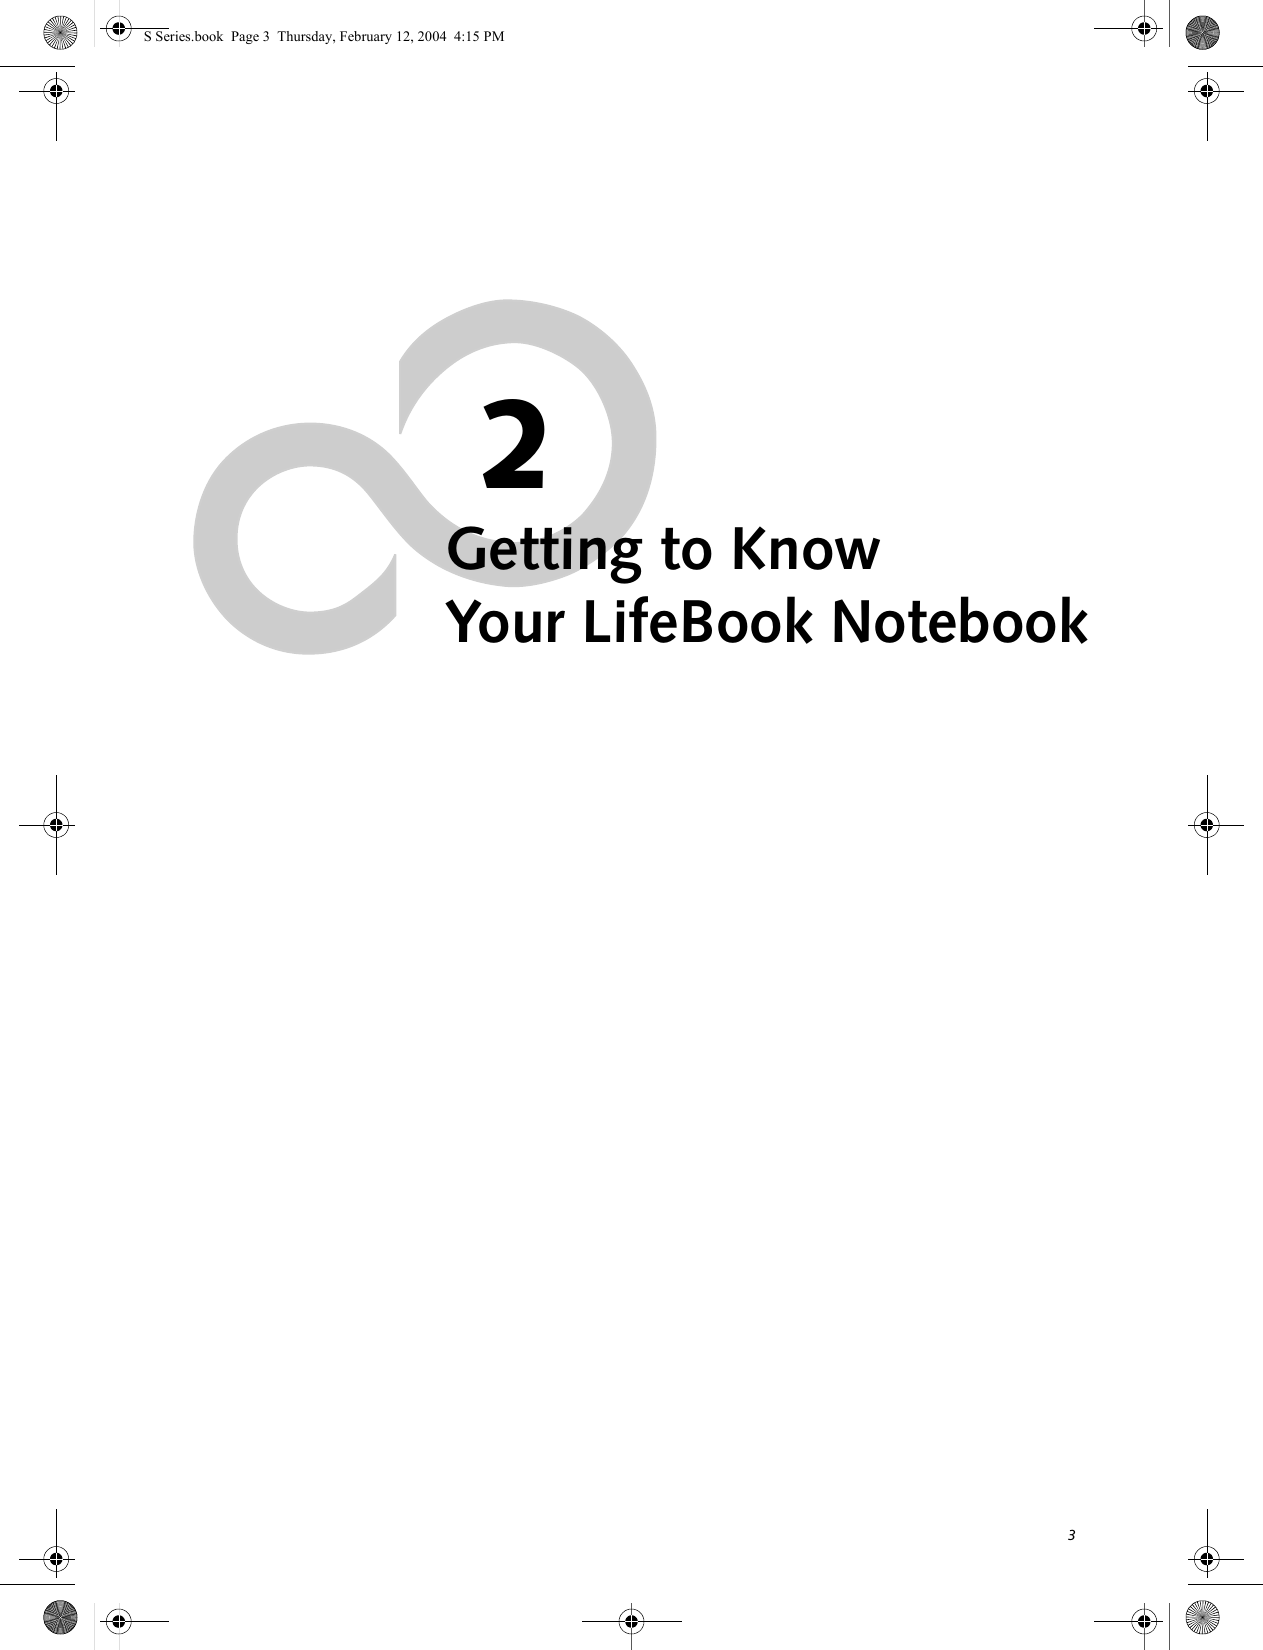 32Getting to KnowYour LifeBook NotebookS Series.book  Page 3  Thursday, February 12, 2004  4:15 PM